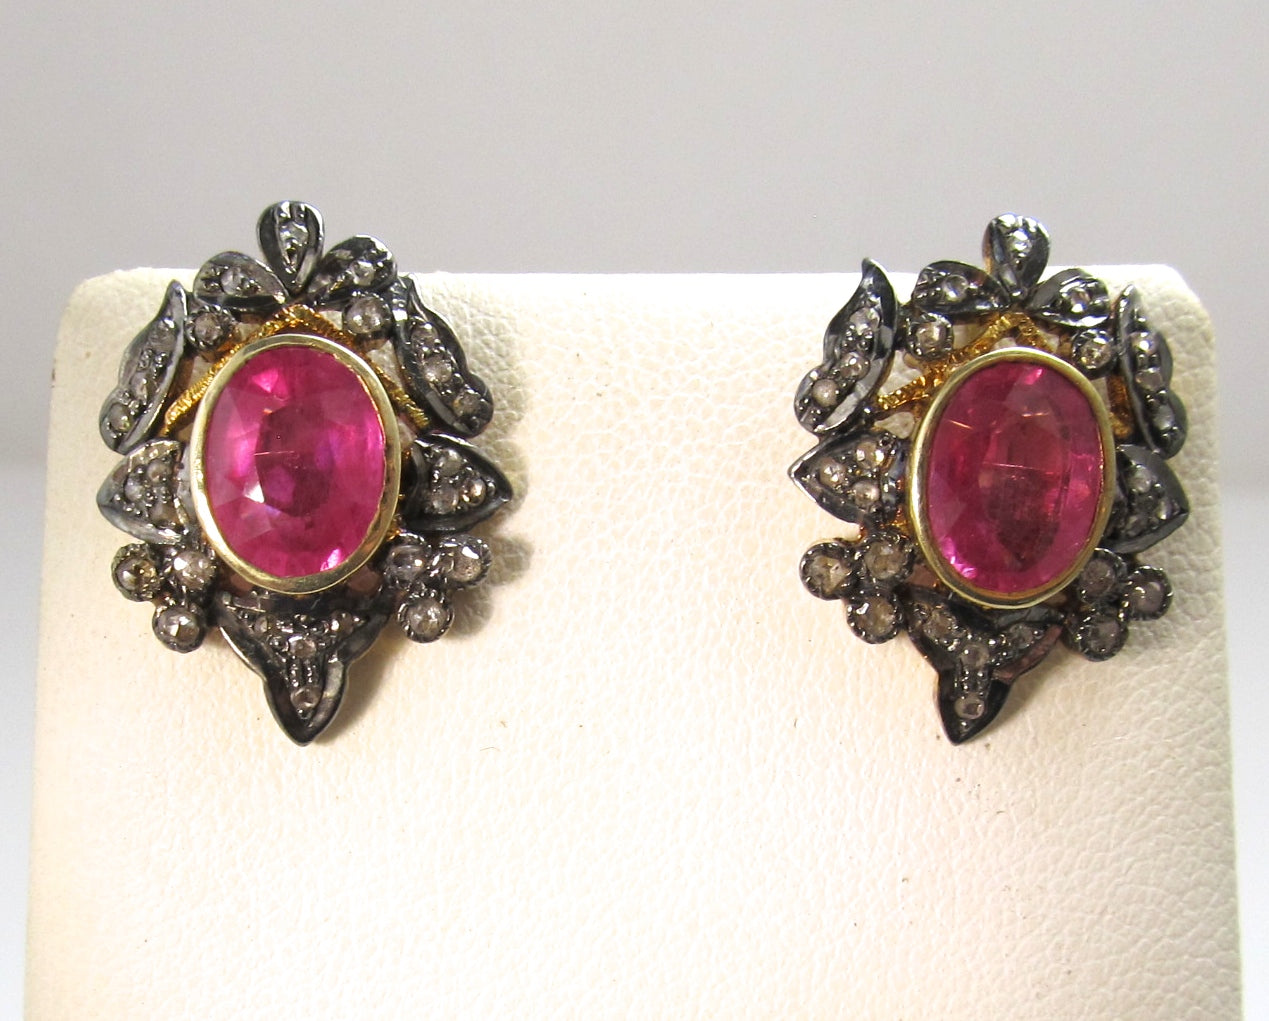 18k and silver earrings with pink tourmalines and rose cut diamonds